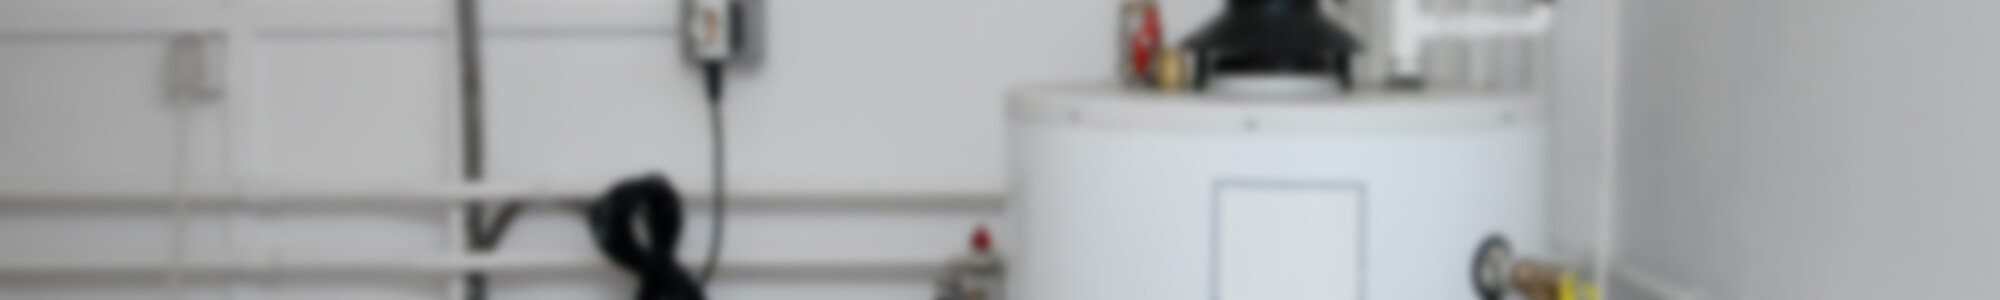 Different types of residential water heaters